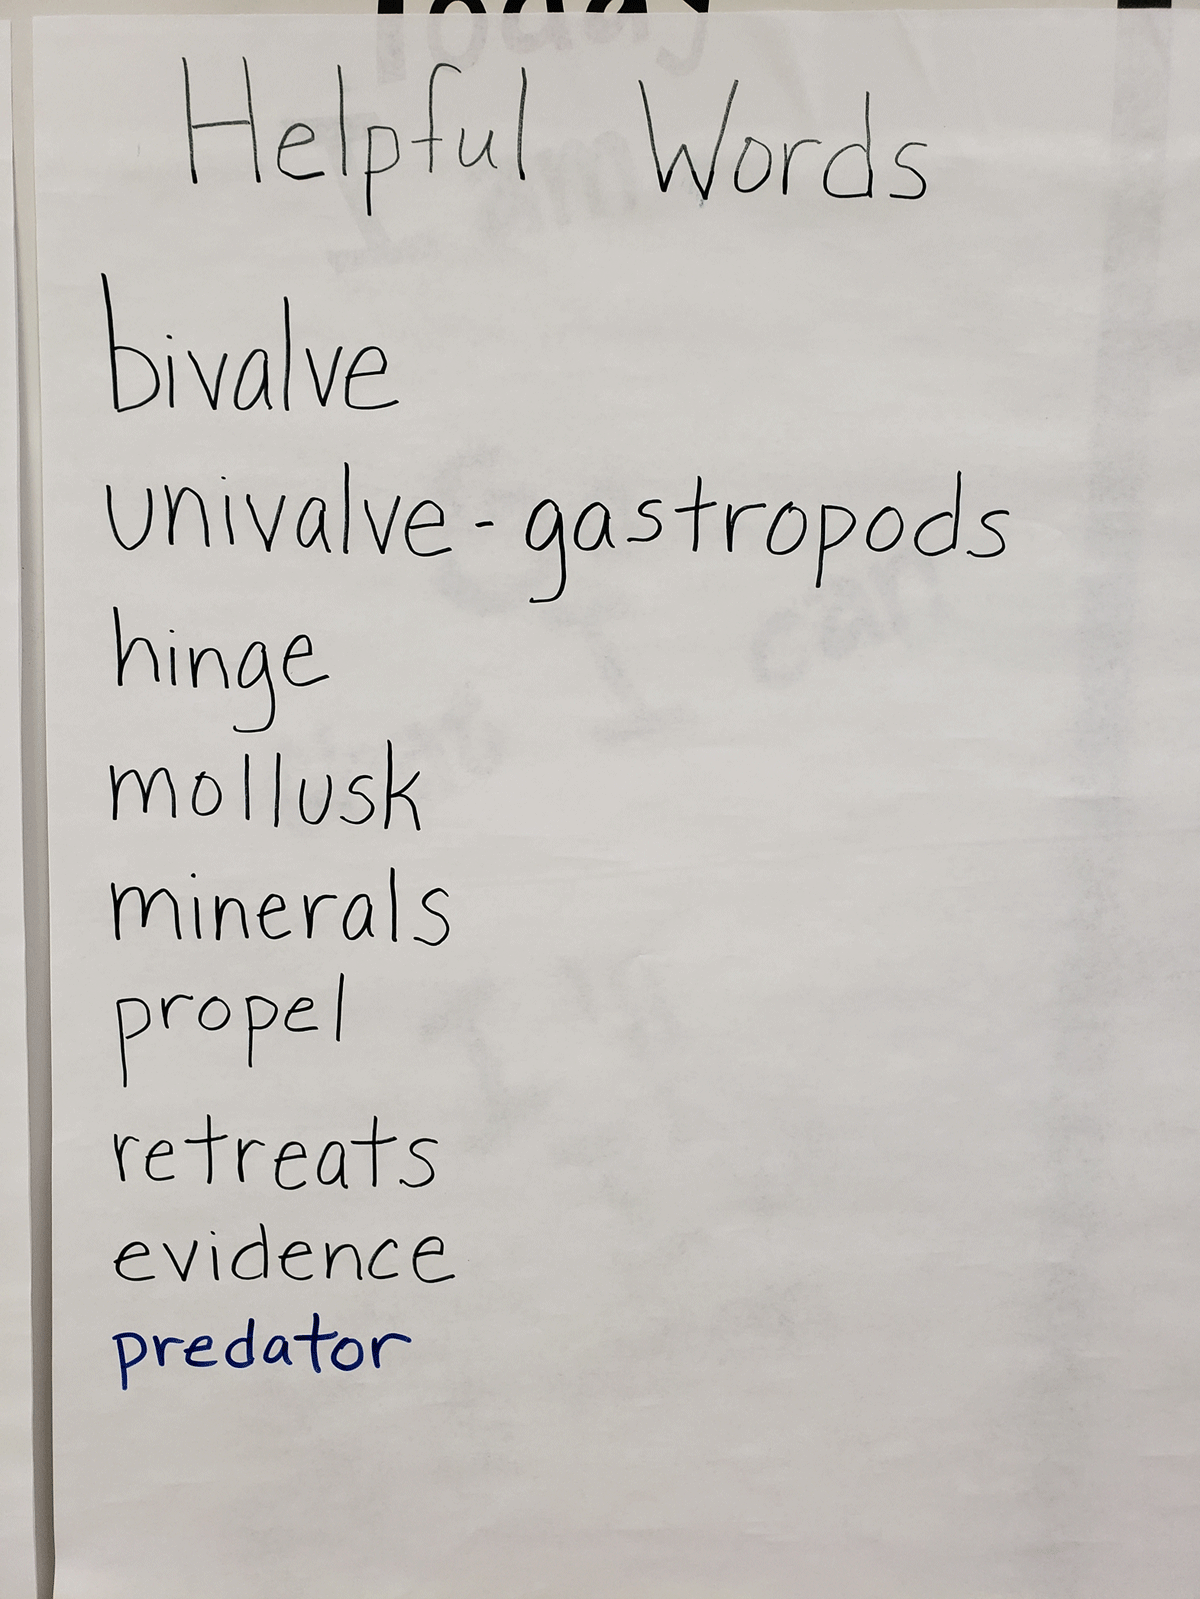 List of helpful words students can use when writing